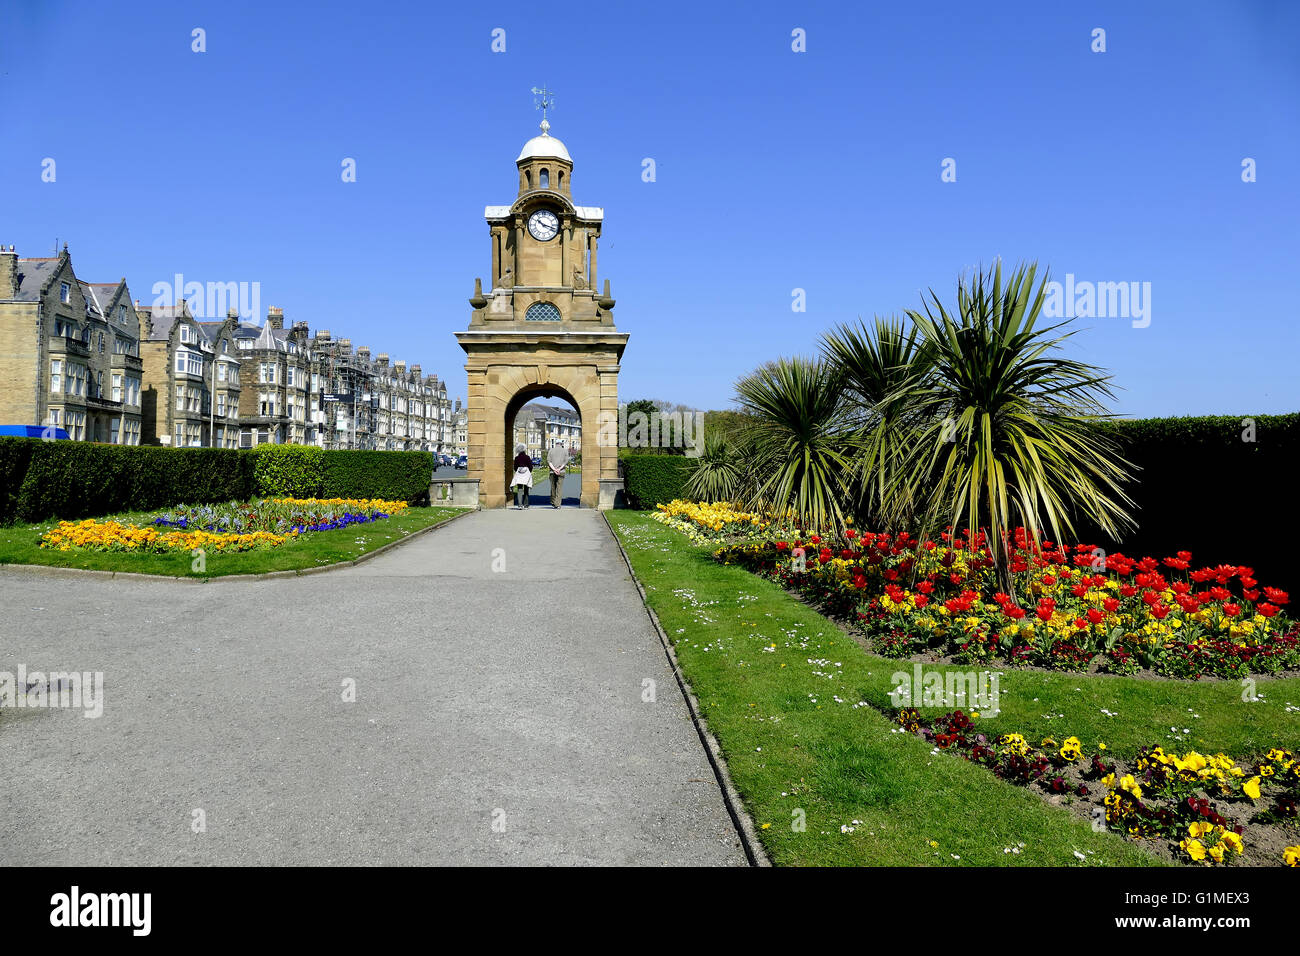 SCARBOROUGH, YORKSHIRE, UK. MAY 09, 2016.  The Holbeck clock tower and South cliff gardens at Scarborough in Yorkshire, UK. Stock Photo